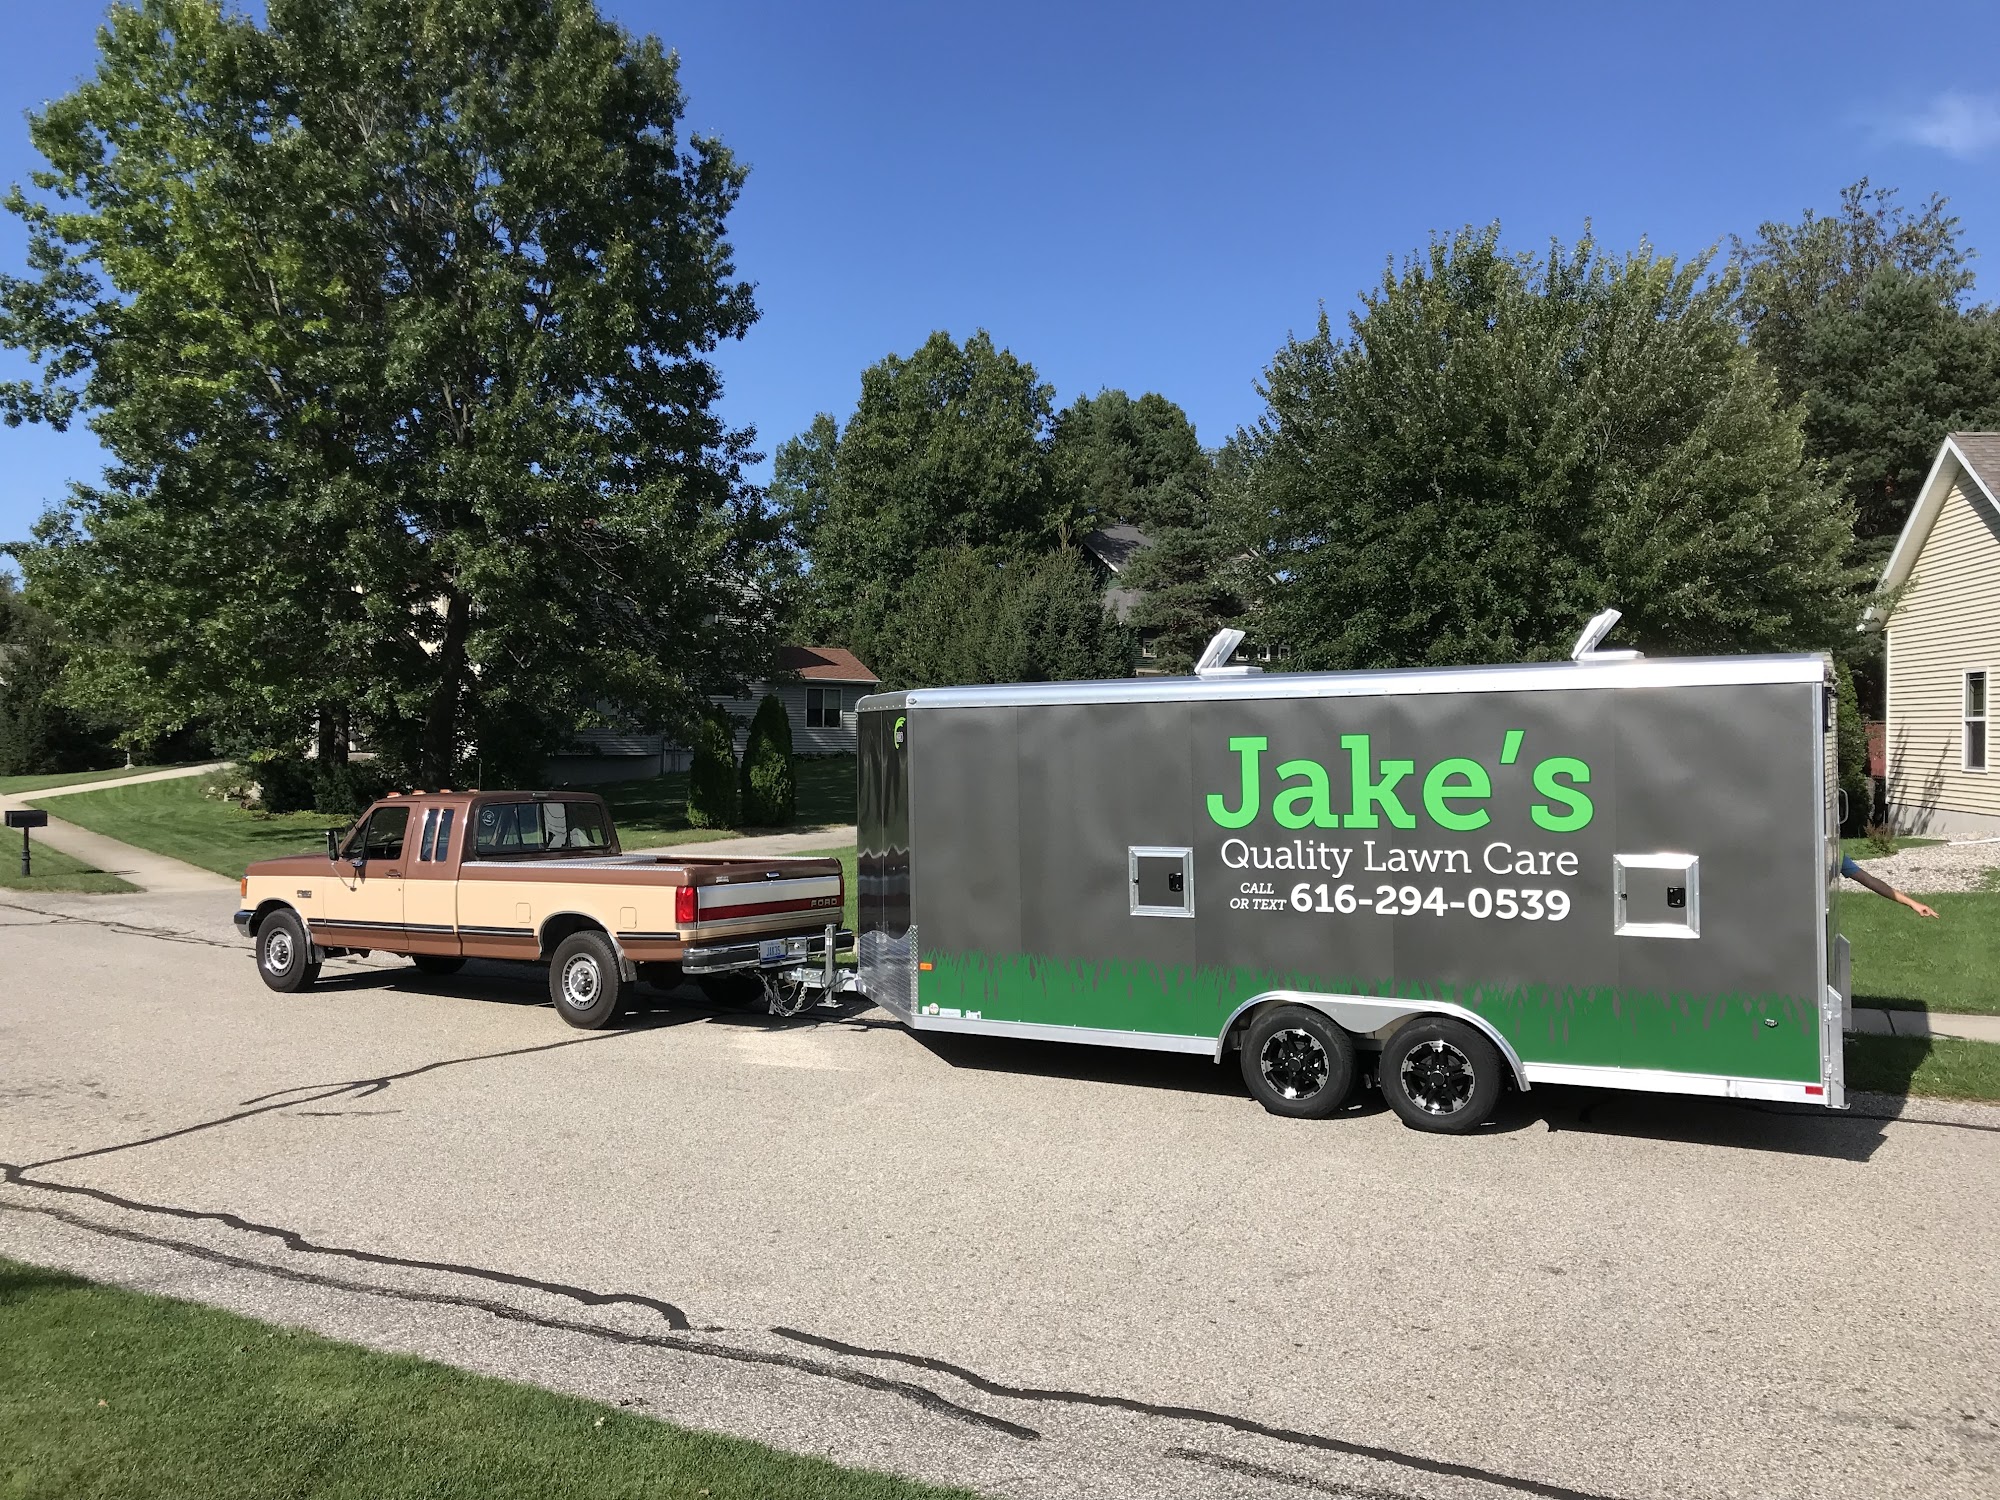 Jake's Quality Lawn Care